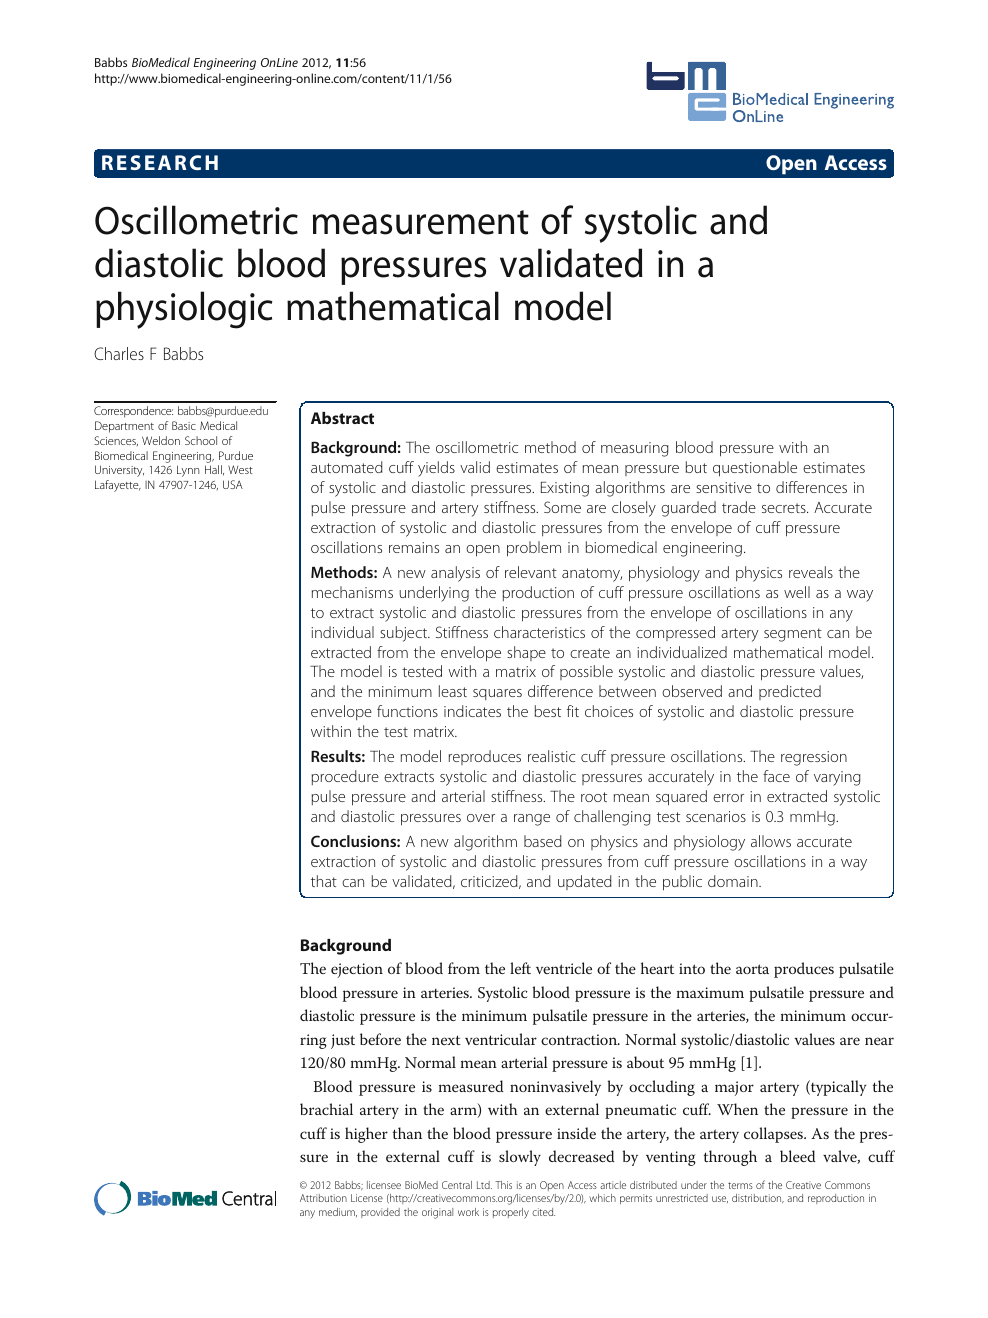 Oscillometric Measurement Of Systolic And Diastolic Blood Pressures Validated In A Physiologic Mathematical Model Topic Of Research Paper In Medical Engineering Download Scholarly Article Pdf And Read For Free On Cyberleninka